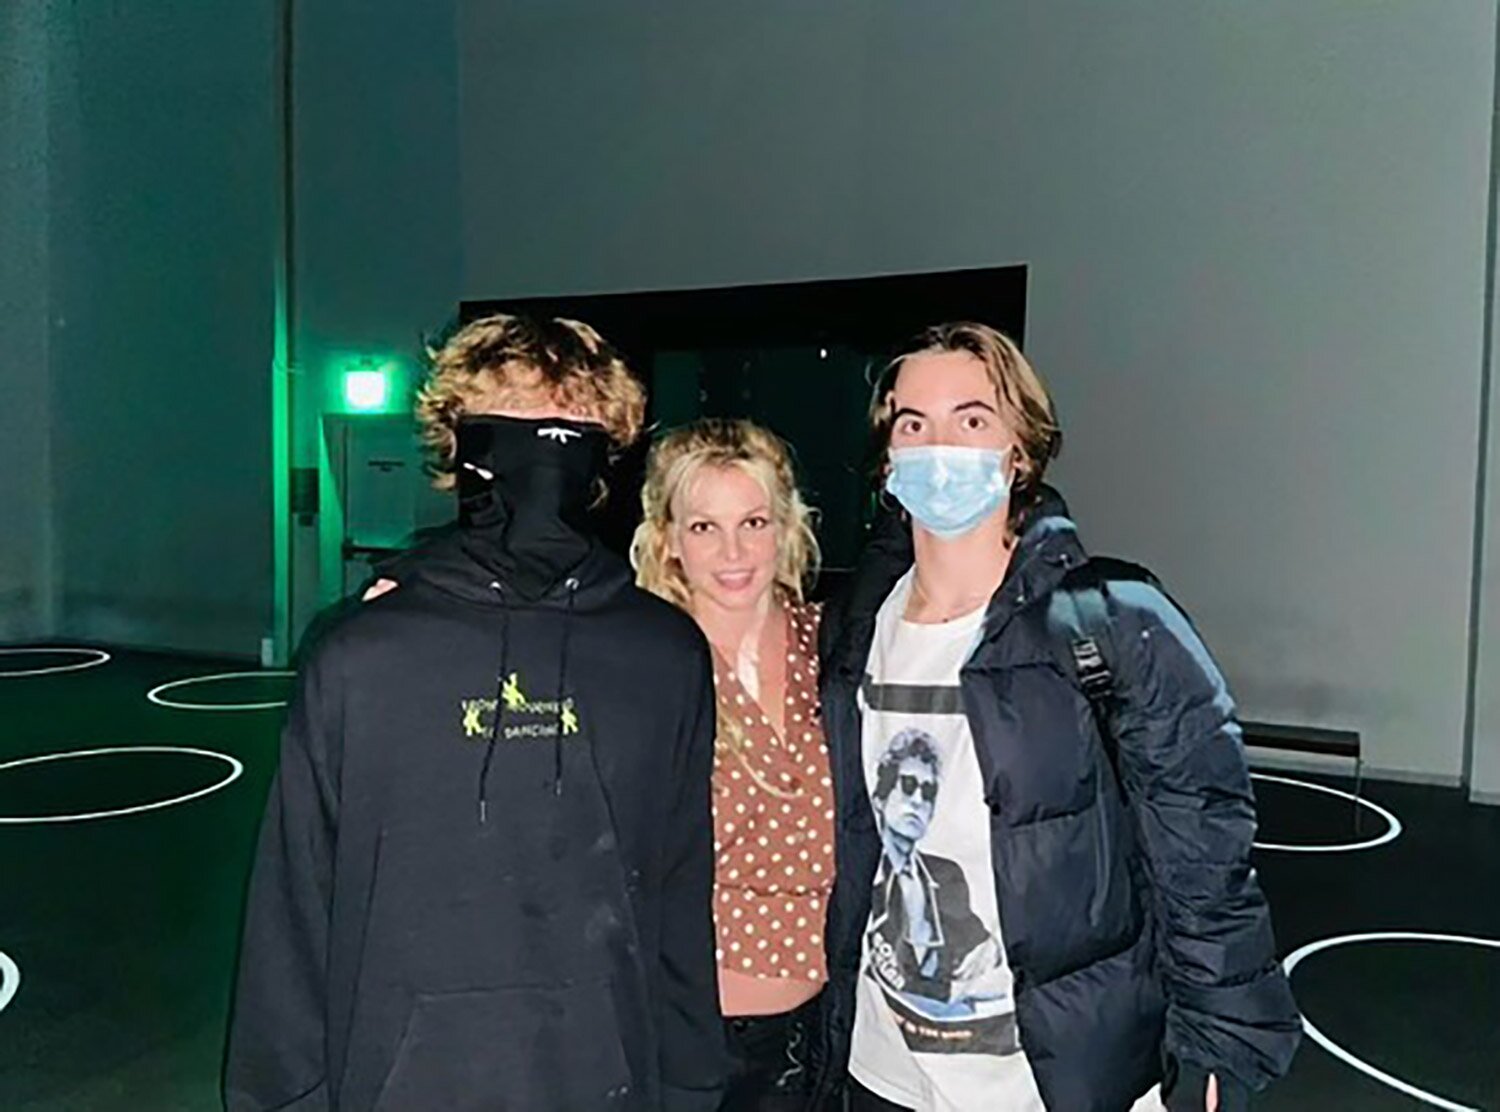 Britney Spears Takes Her Sons to the Interactive Van Gogh Exhibit: Me and My Boys'

https://www.instagram.com/p/CV3vsRPP9x0/